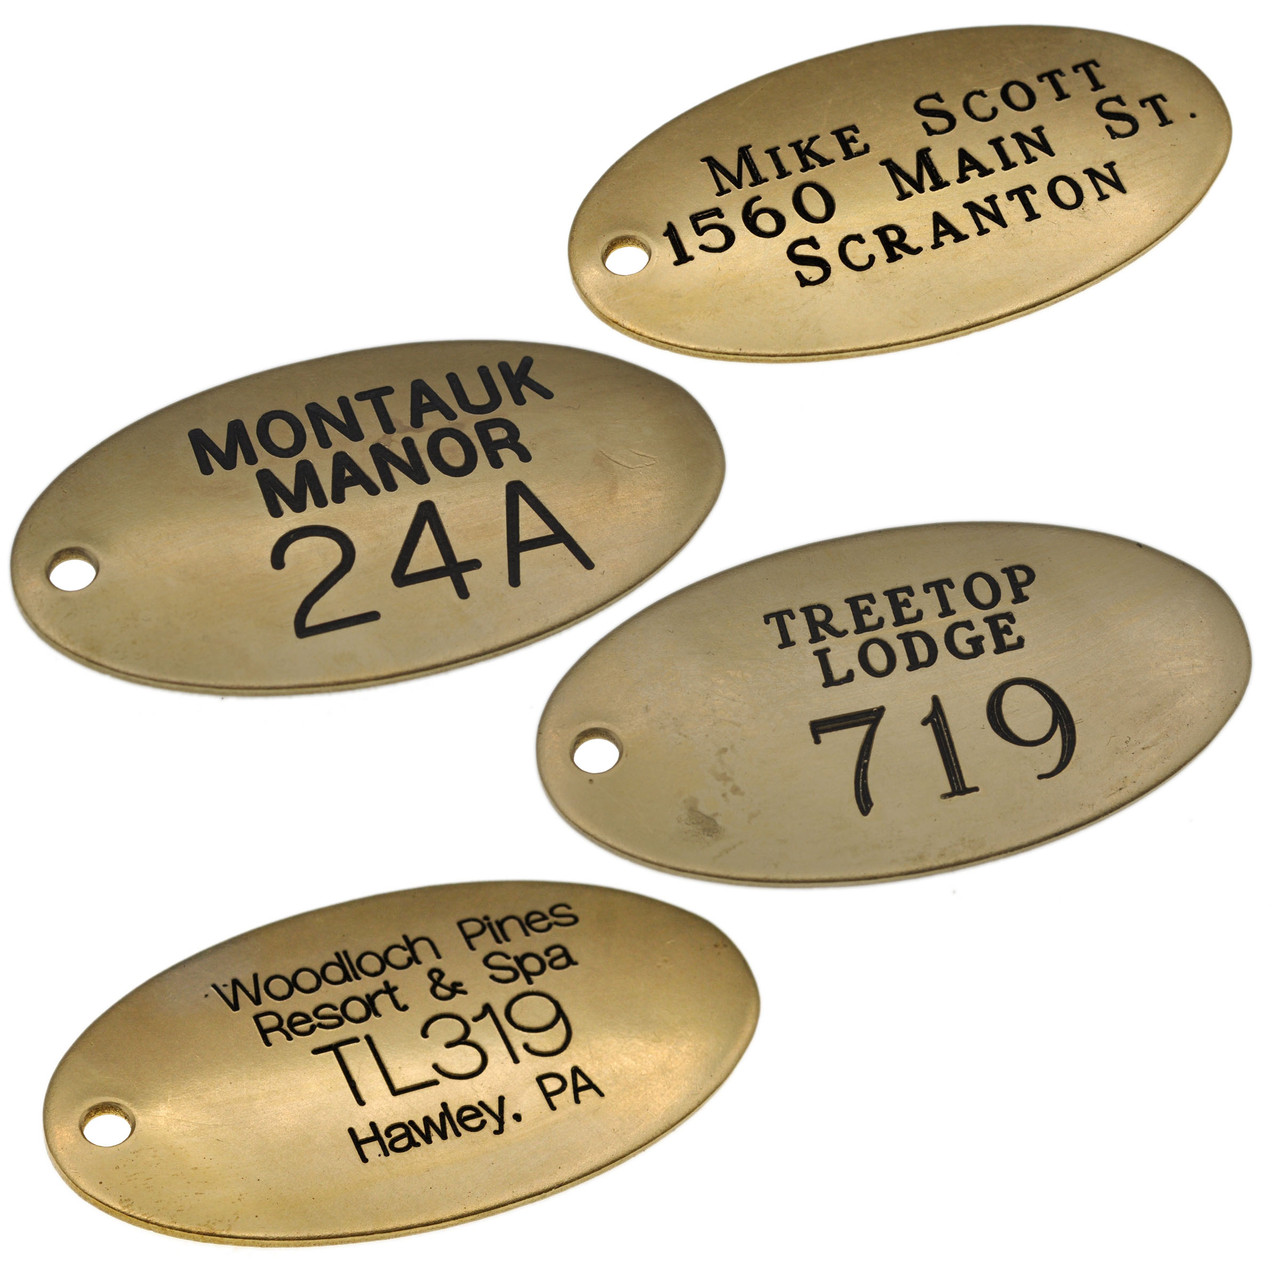 Solid Brass Oval Tag - CUSTOM ENGRAVED